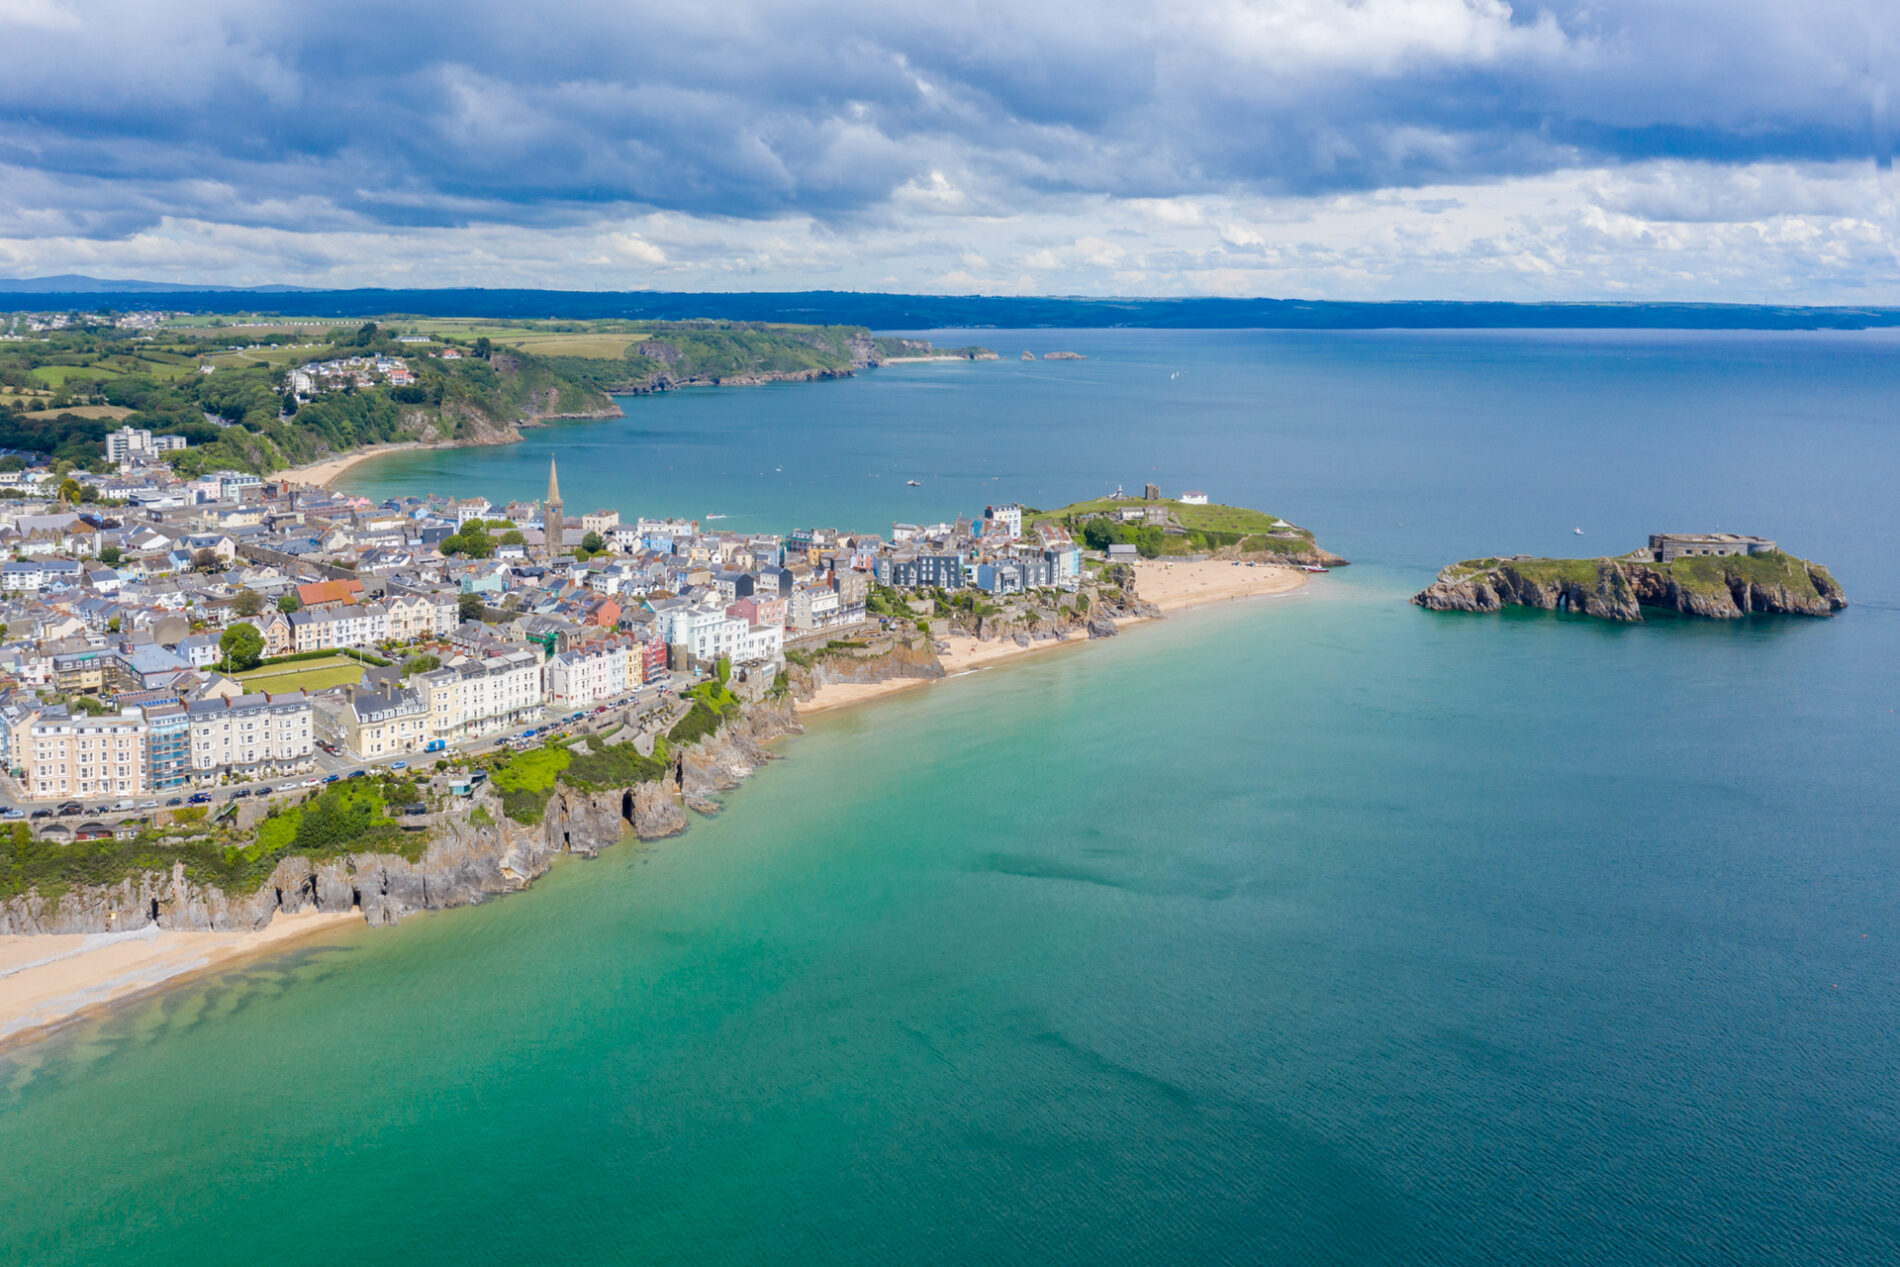 As the housing market in Wales opens, so does an exciting new estate agency to put West Wales back on the map